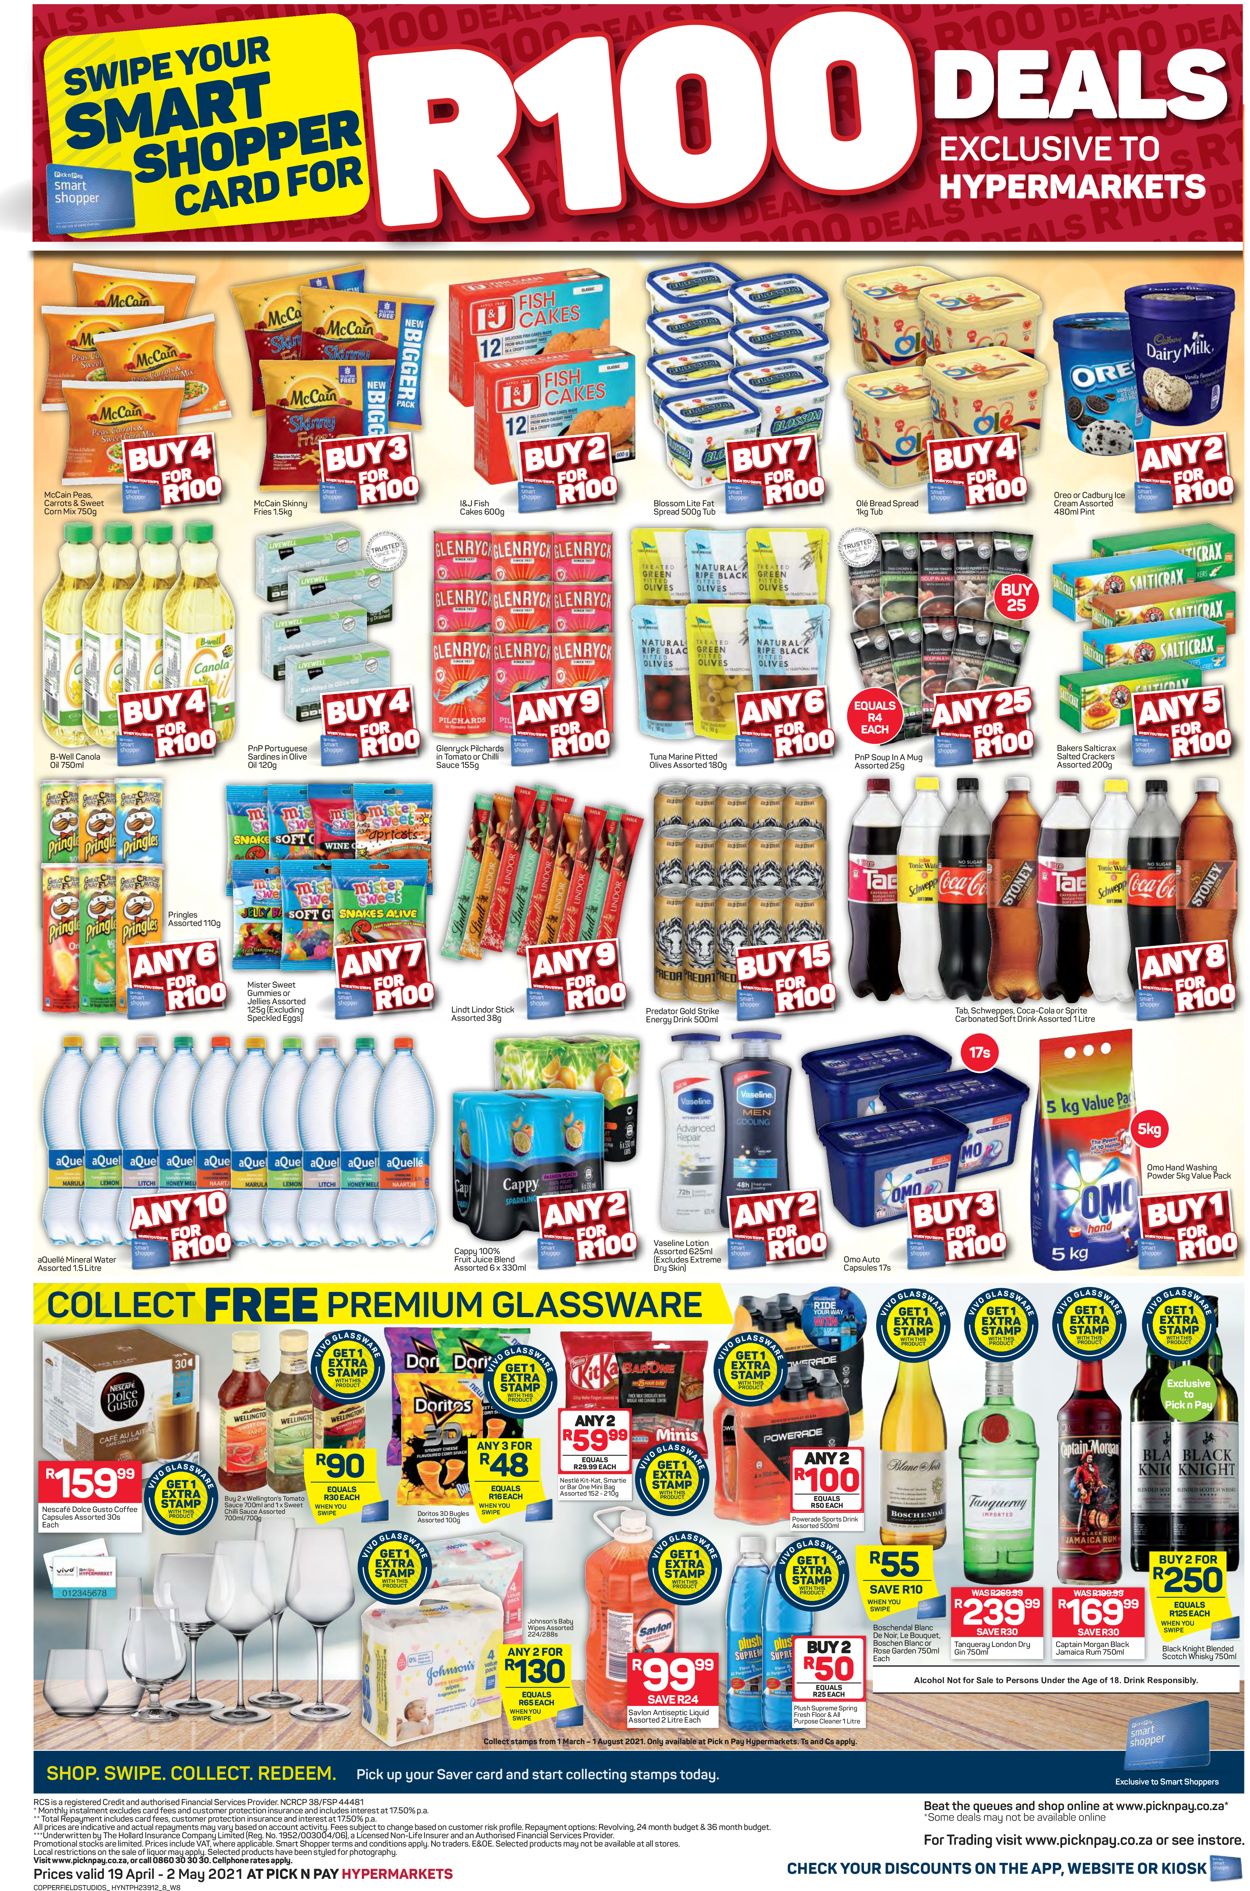 Pick n Pay Catalogue from 2021/03/01